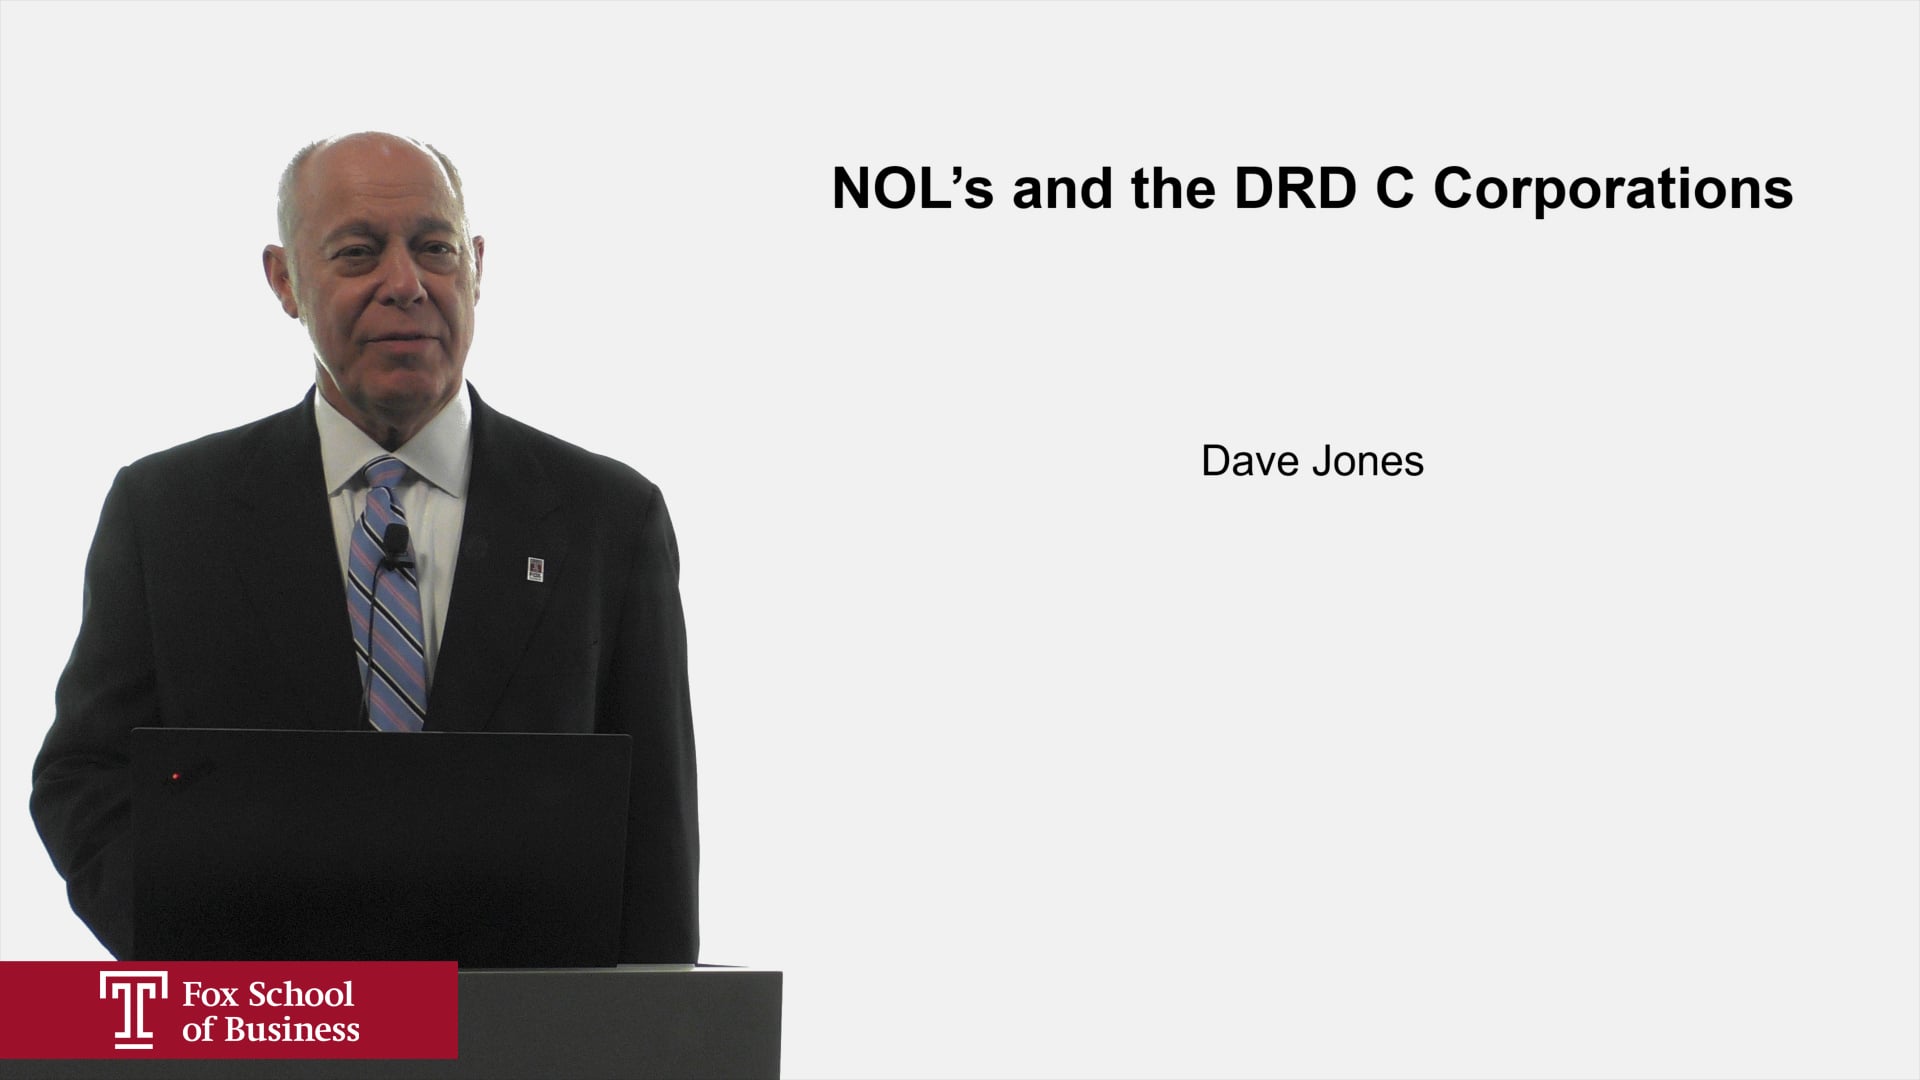 NOL’s and the DRD C Corporations